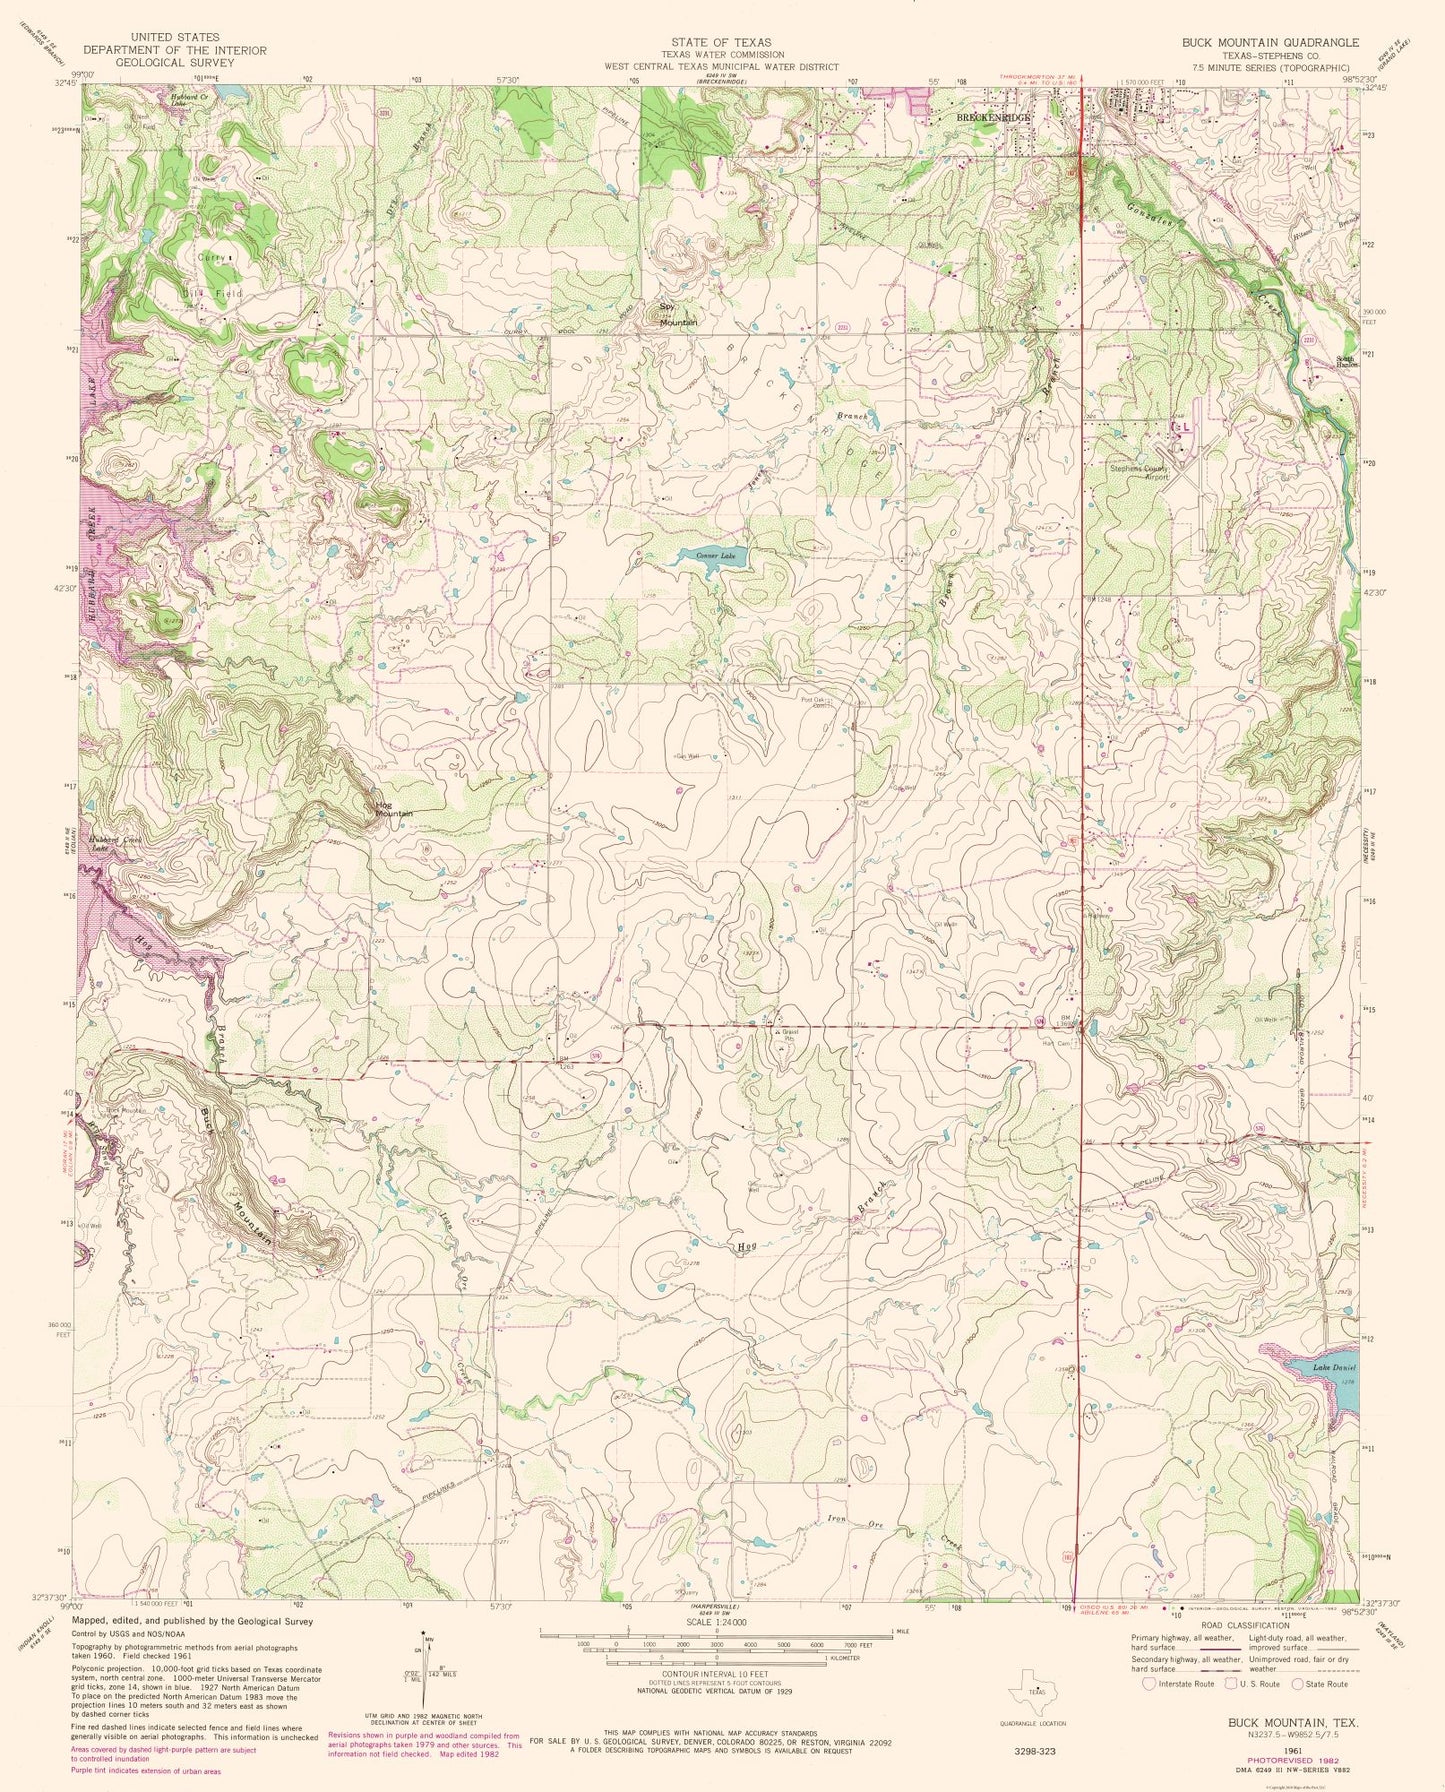 Topographical Map - Buck Mountain Texas Quad - USGS 1961 - 23 x 28.52 - Vintage Wall Art